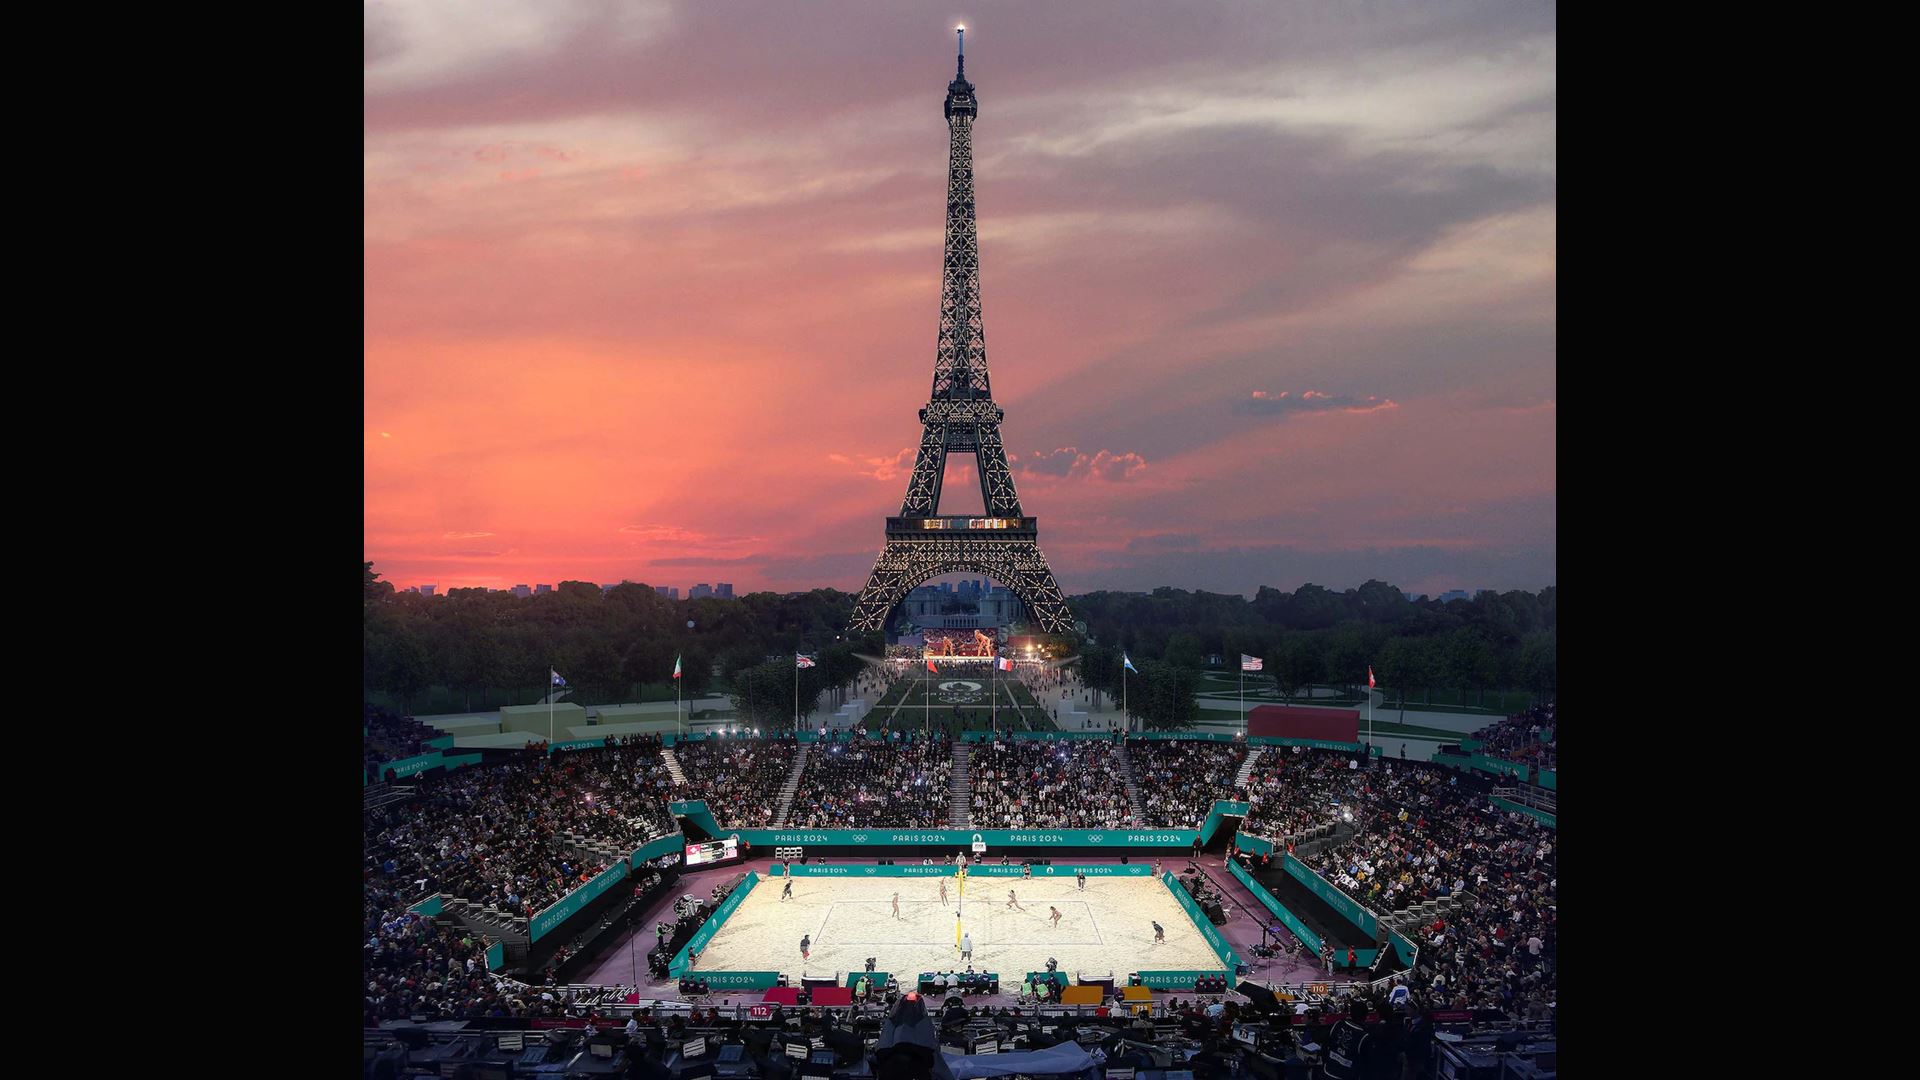 Paris Olympics 2024 Tickets: Paris Olympics 2024: Tickets, registration and  all you need to know - The Economic Times